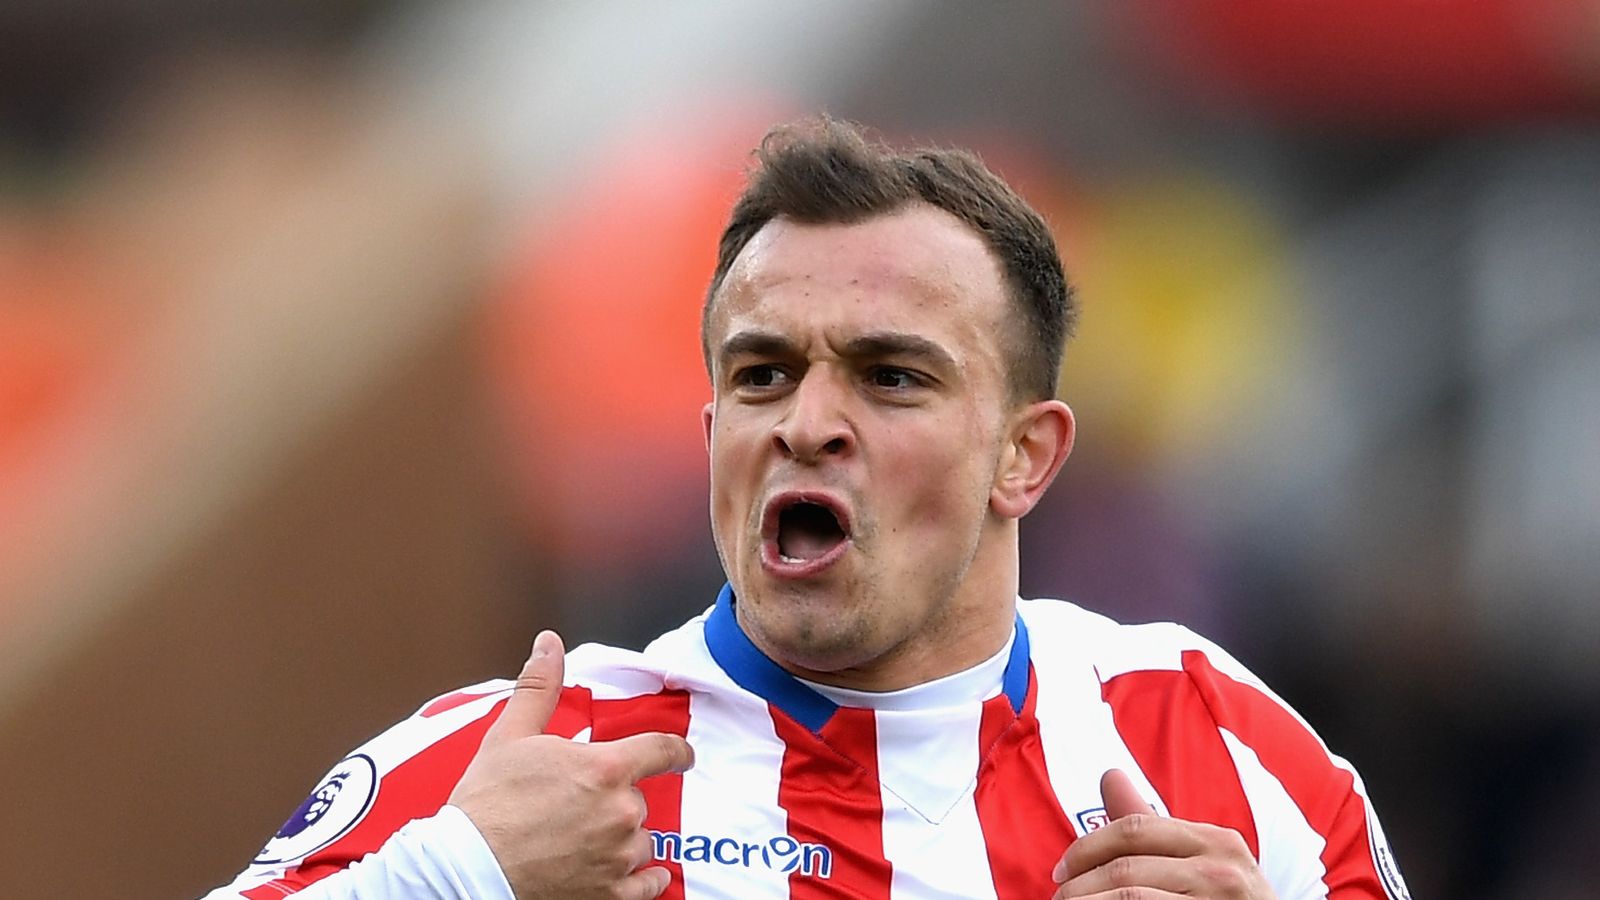  Xherdan Shaqiri is pictured playing for Stoke City in a red and white striped jersey, white shorts, and red socks.